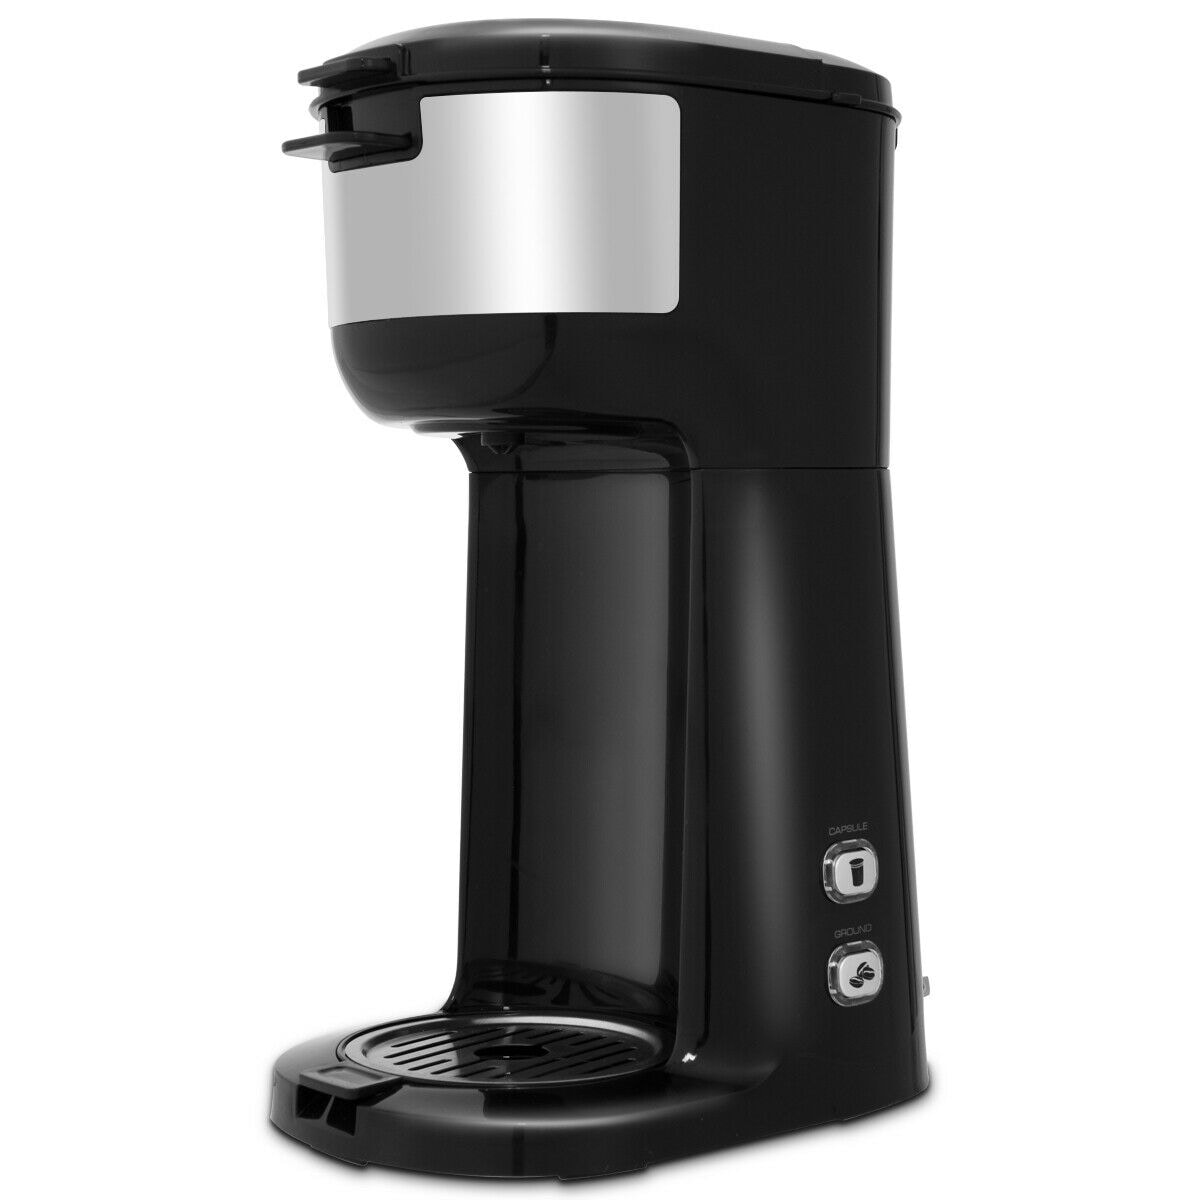 Mr. Coffee FLX Series Black 12-Cup Programmable Coffee Maker